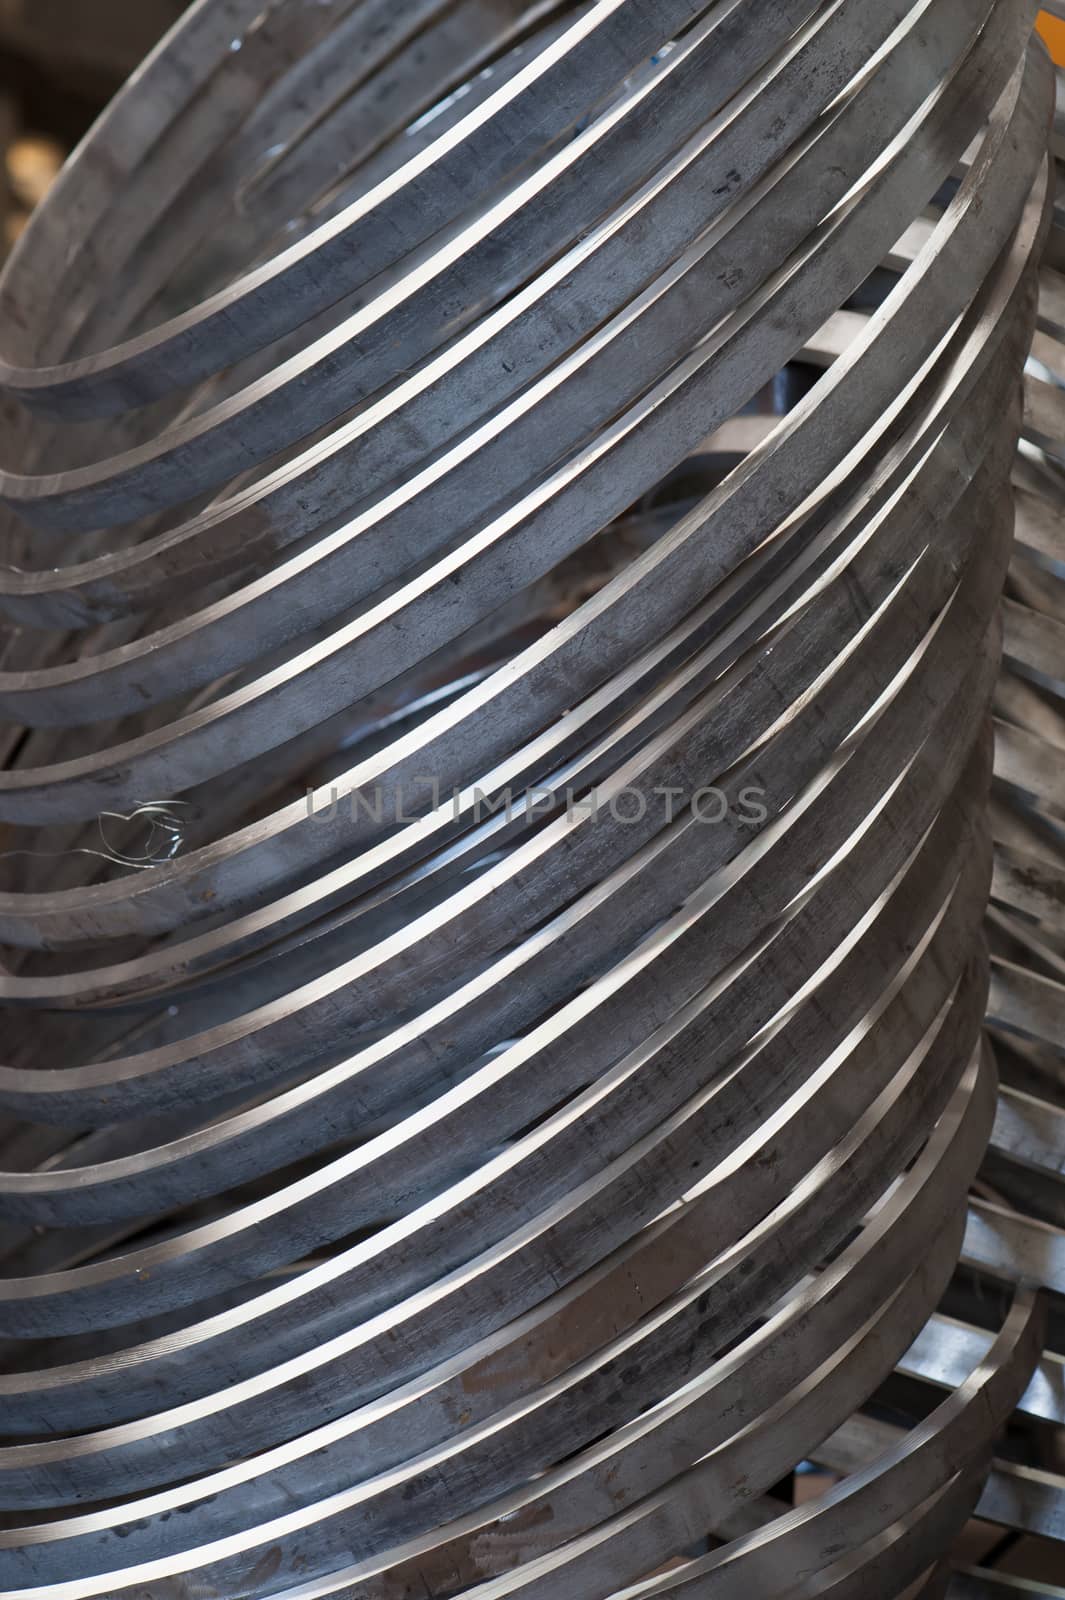 Rings of stainless steel at an industrial workshop.